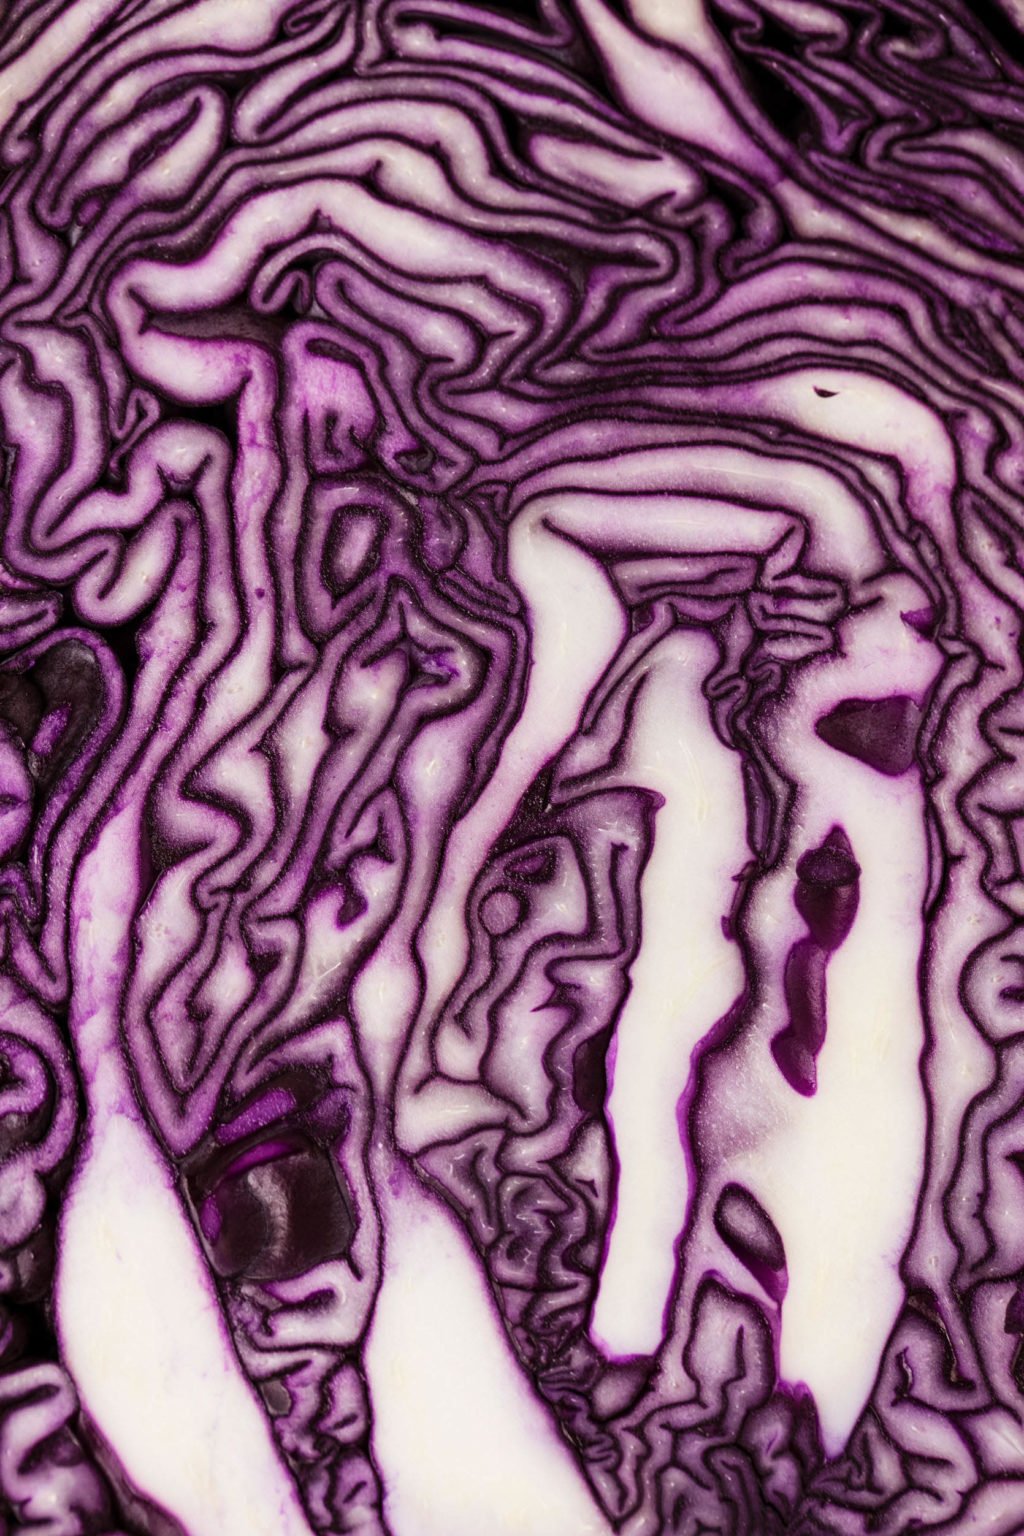 A close up image of a cross-section of cut red cabbage.